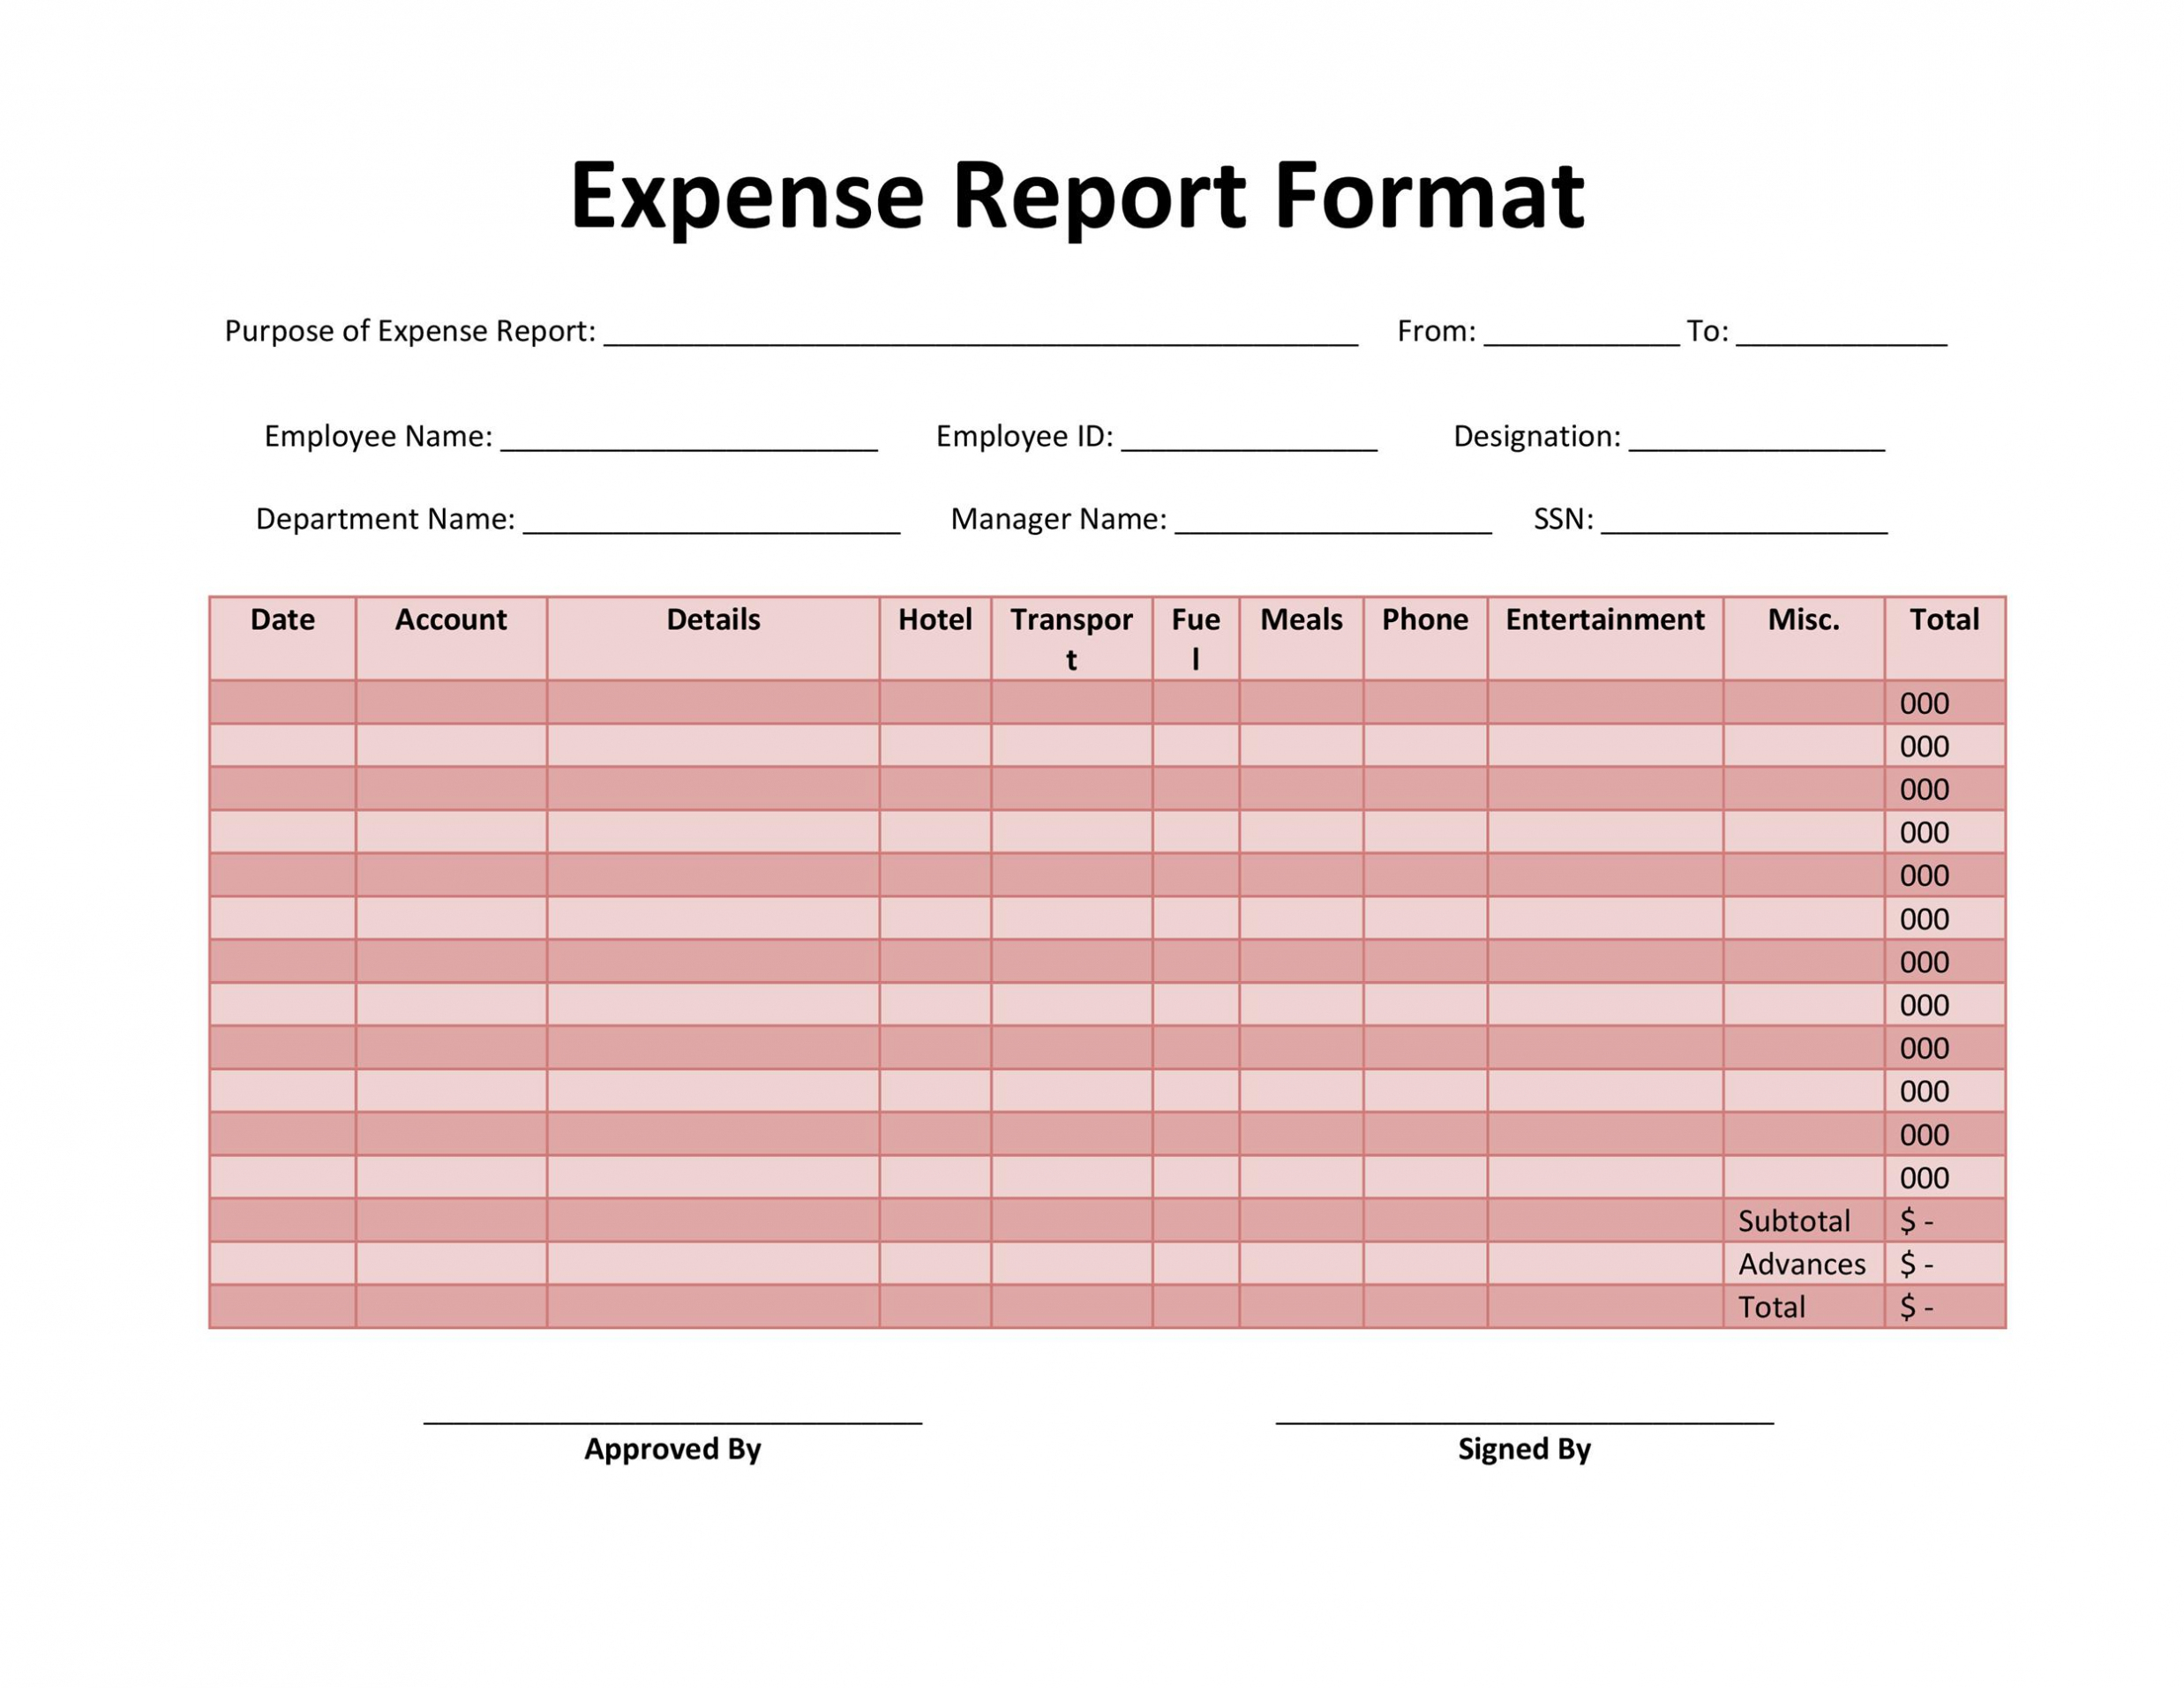 40+ Expense Report Templates To Help You Save Money ᐅ Regarding Expense Report Spreadsheet Template Excel